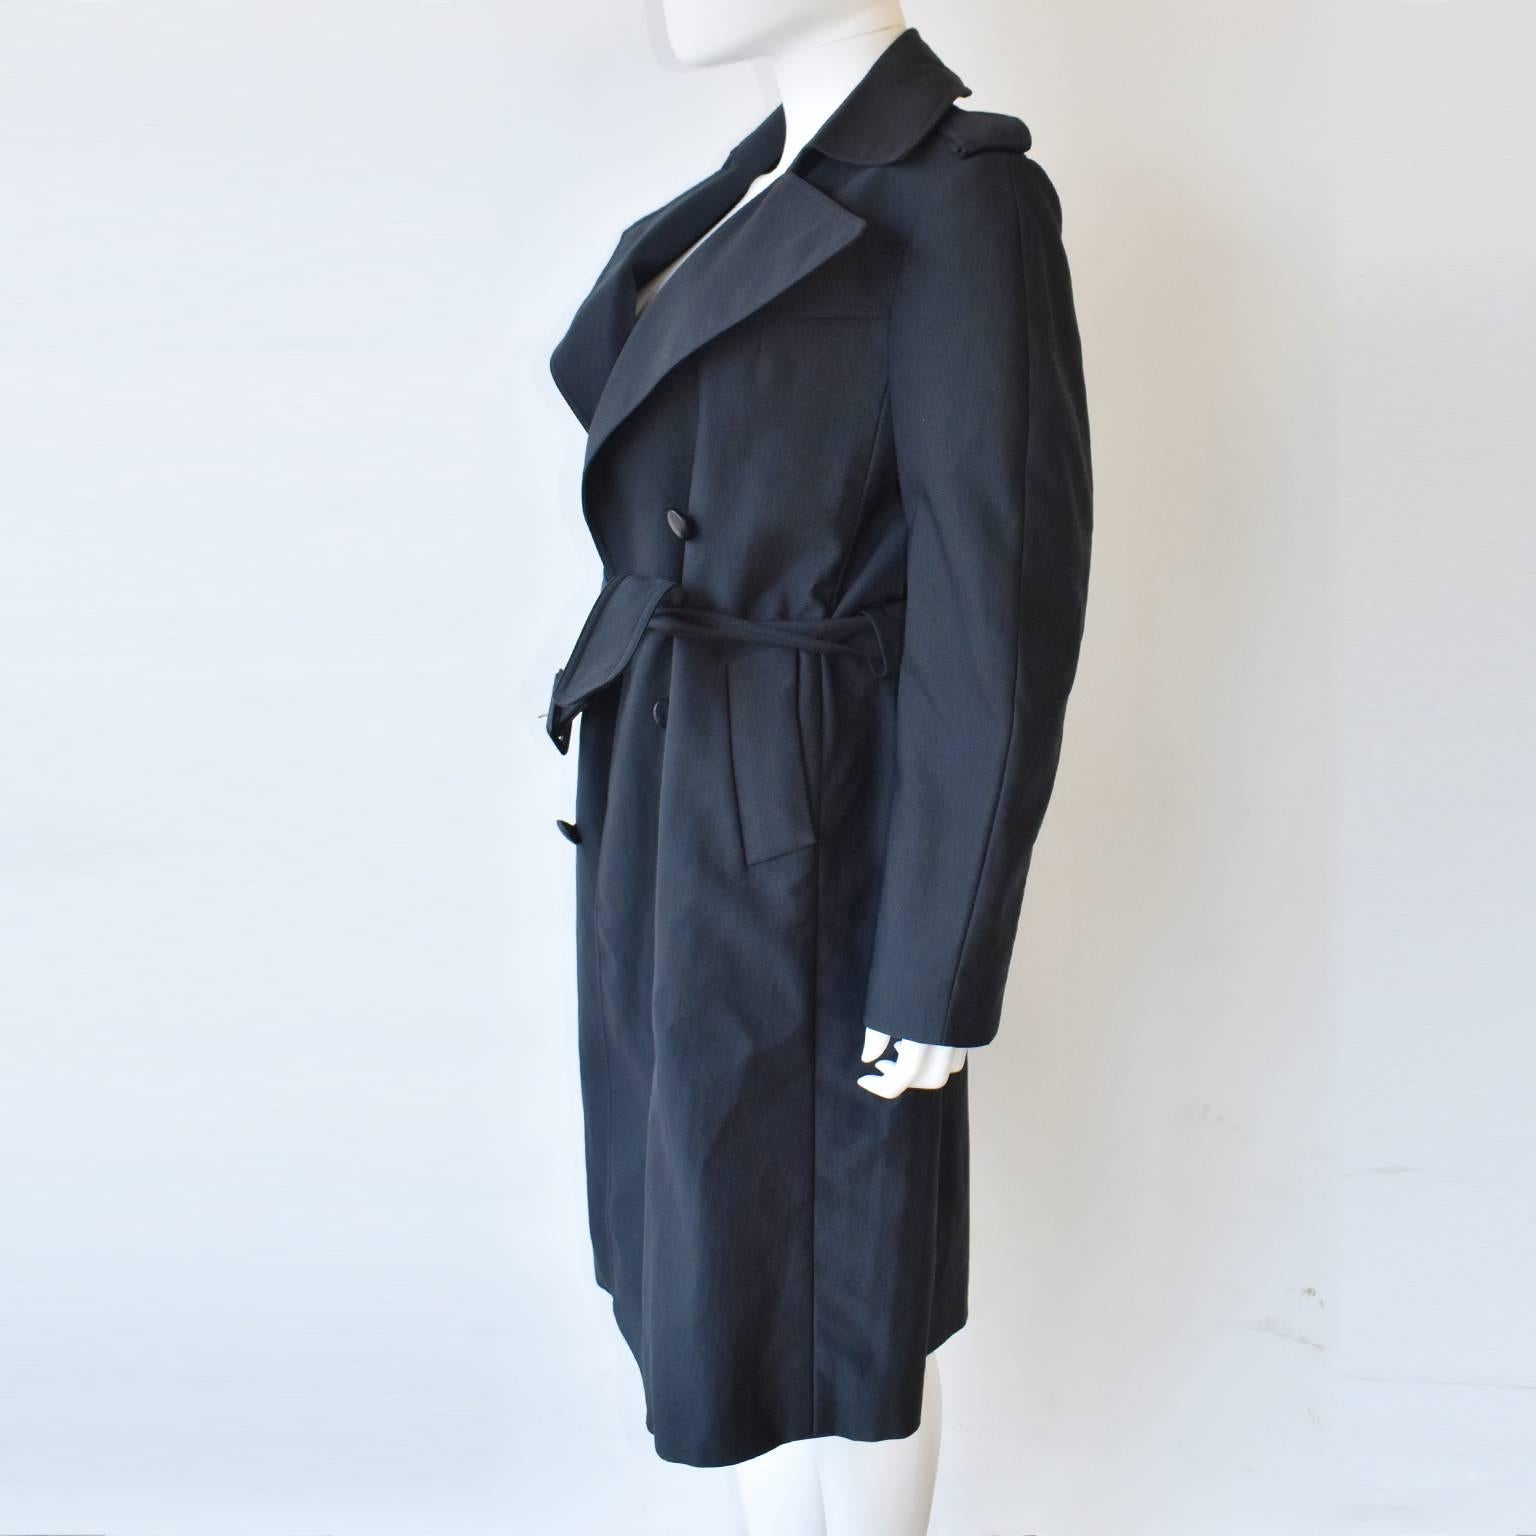 A charcoal grey trenchcoat with leather buttons by Céline. The buttons are decorative; the coat is fastened with the belt which has to be tied in a knot. 
The coat is a sample, there is no care label.  It is in excellent condition. 